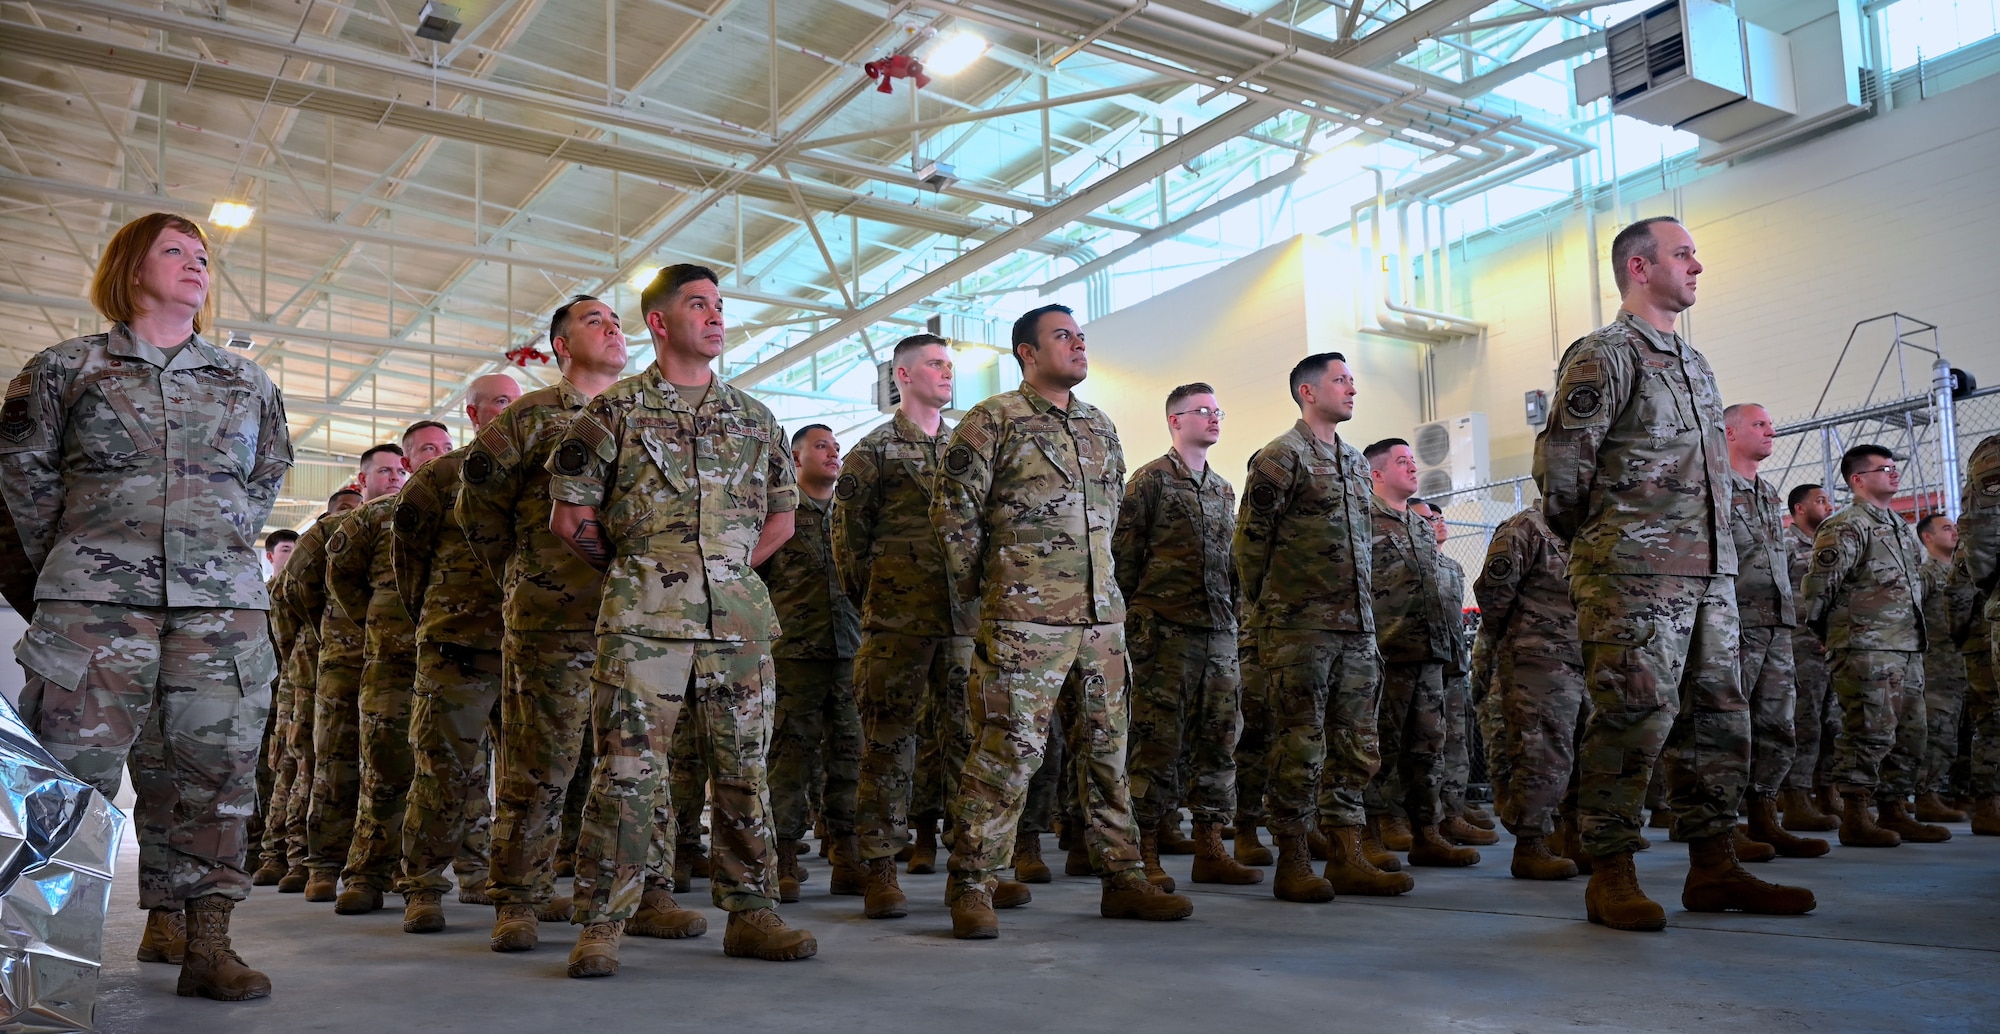 Col. Jeanne Bisesi, 433rd Mission Support Group commander, stands in formation alongside 433rd Civil Engineer Squadron Airmen as they listen to opening remarks of the assumption of command ceremony at Joint Base San Antonio-Lackland, Texas, April 1, 2023.